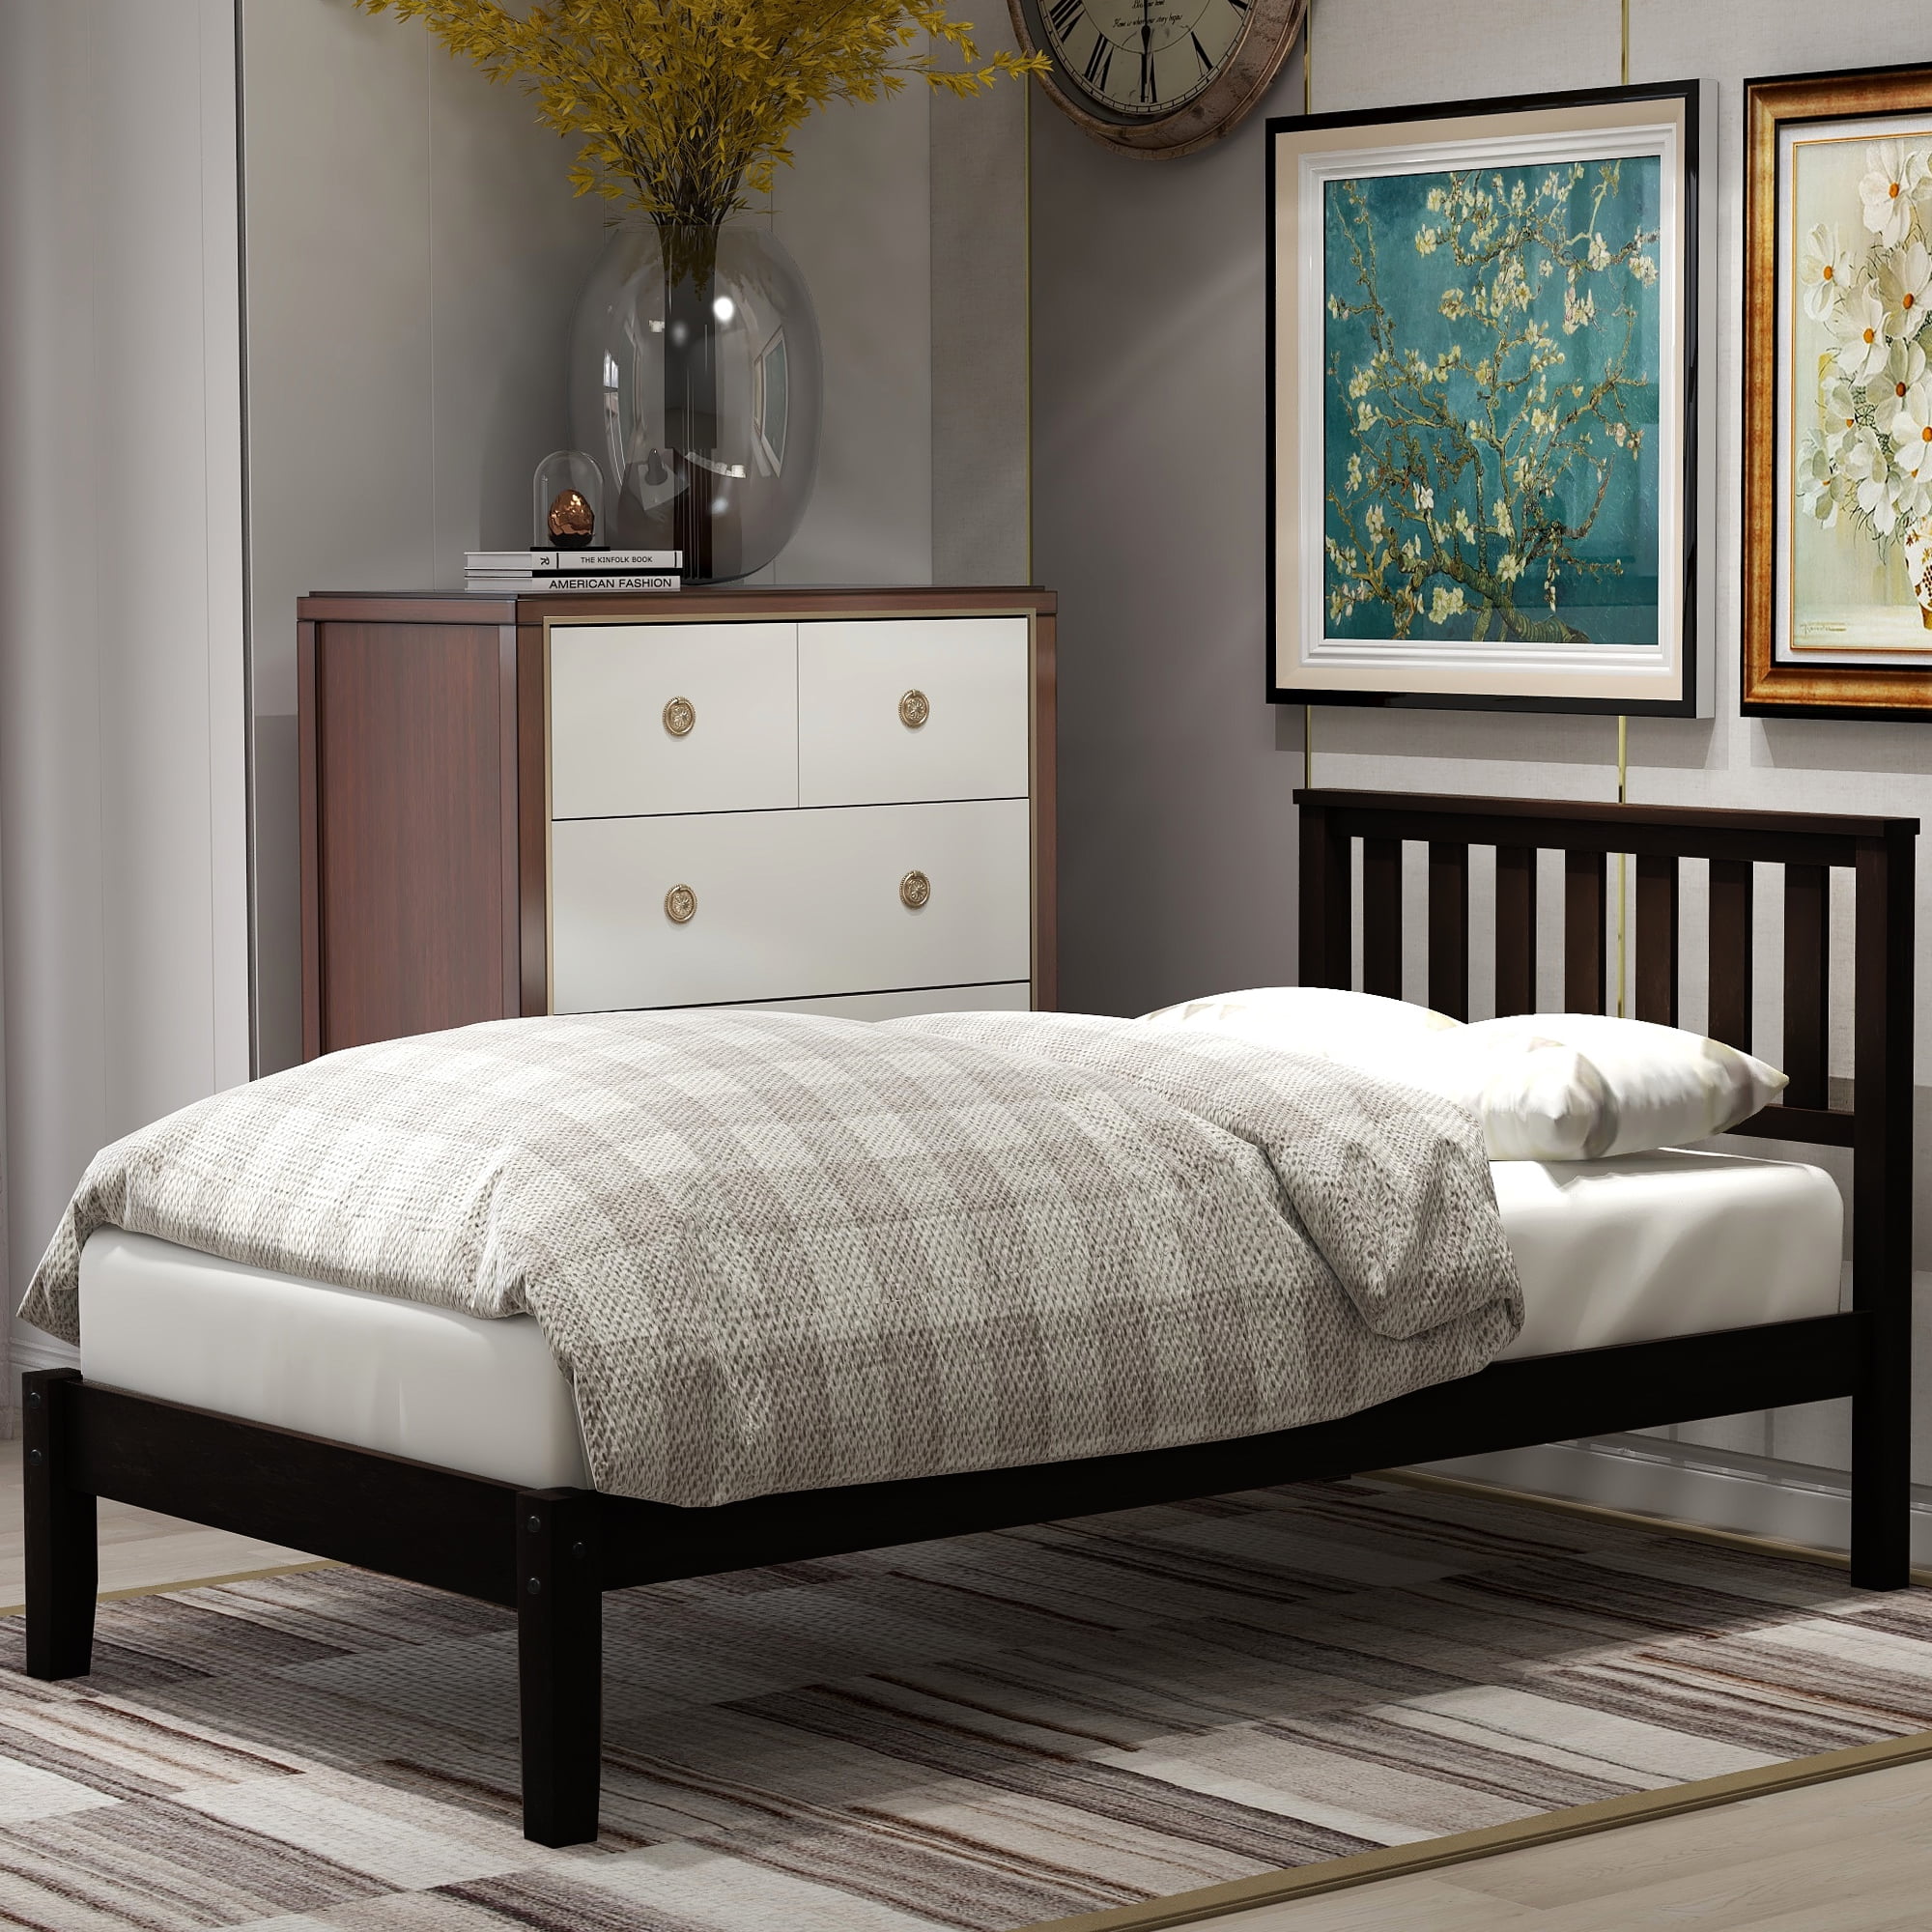 Details about   Espresso Finish Twin Wooden Panel Headboard Bedroom Furniture Bed Frame Mount 